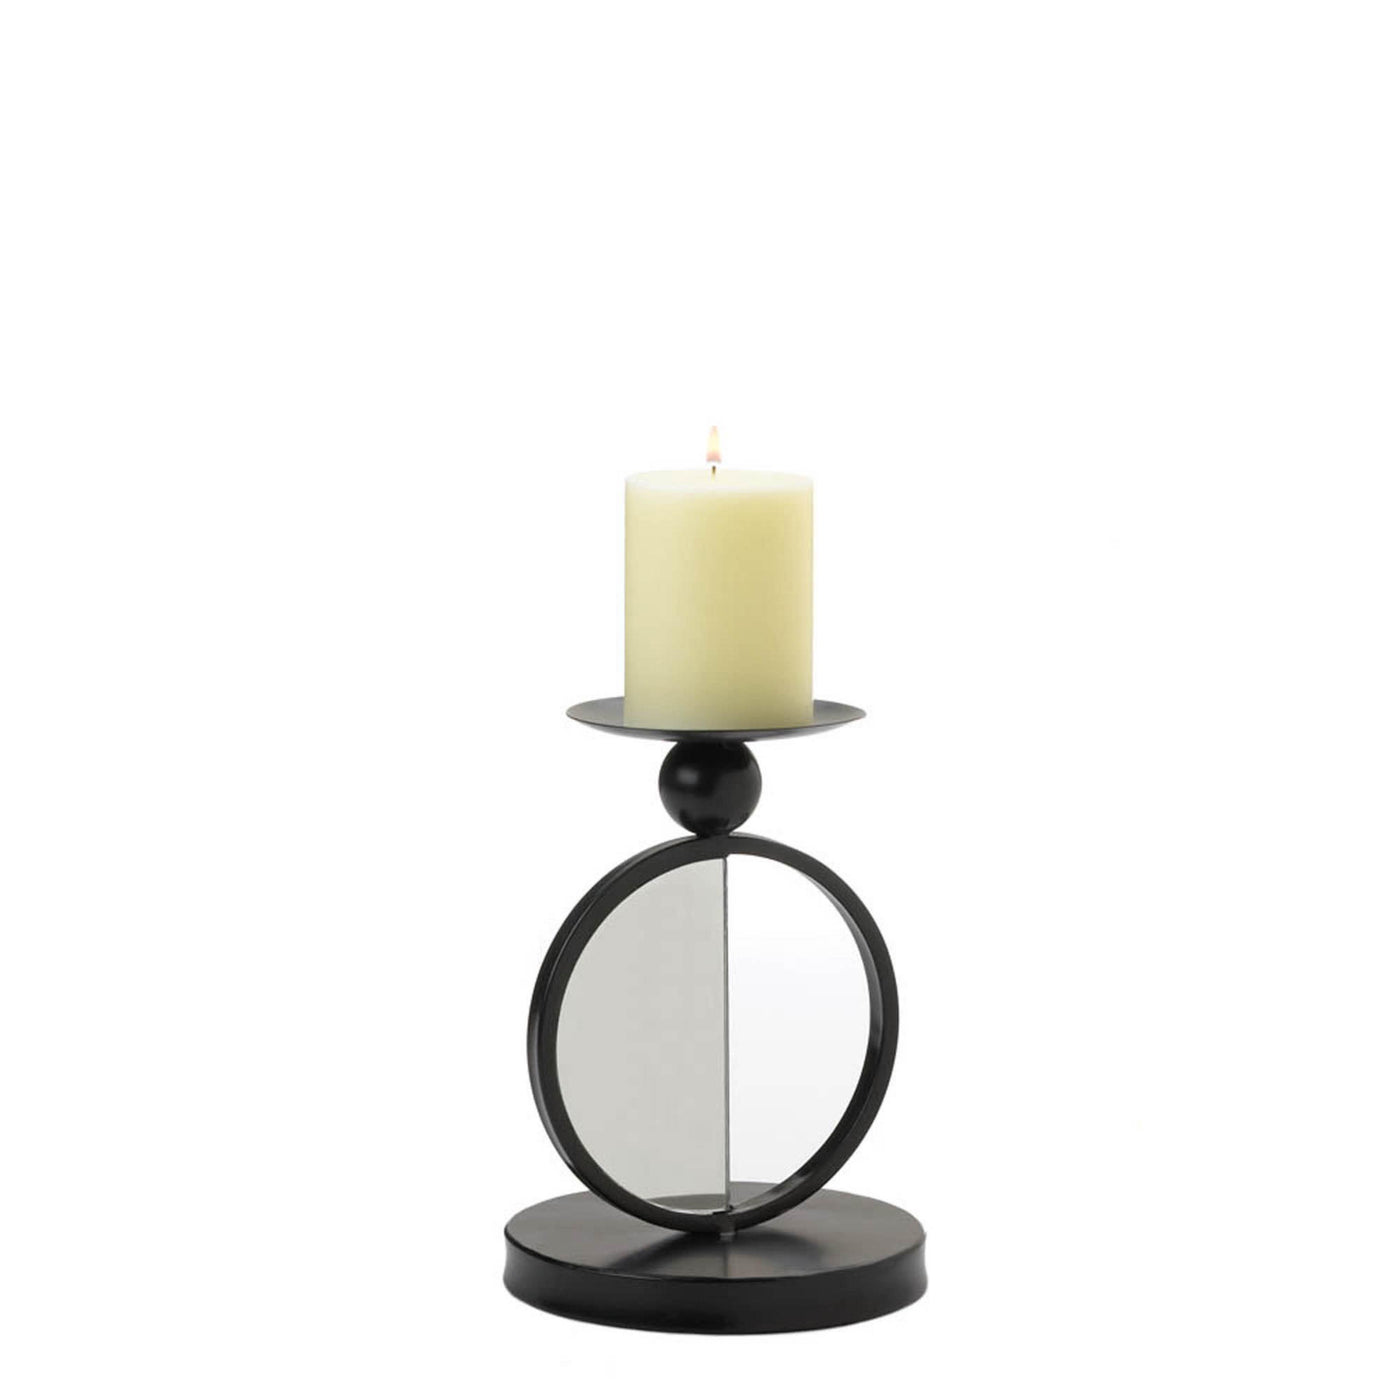 Single Mirrored Glass Candle Holder